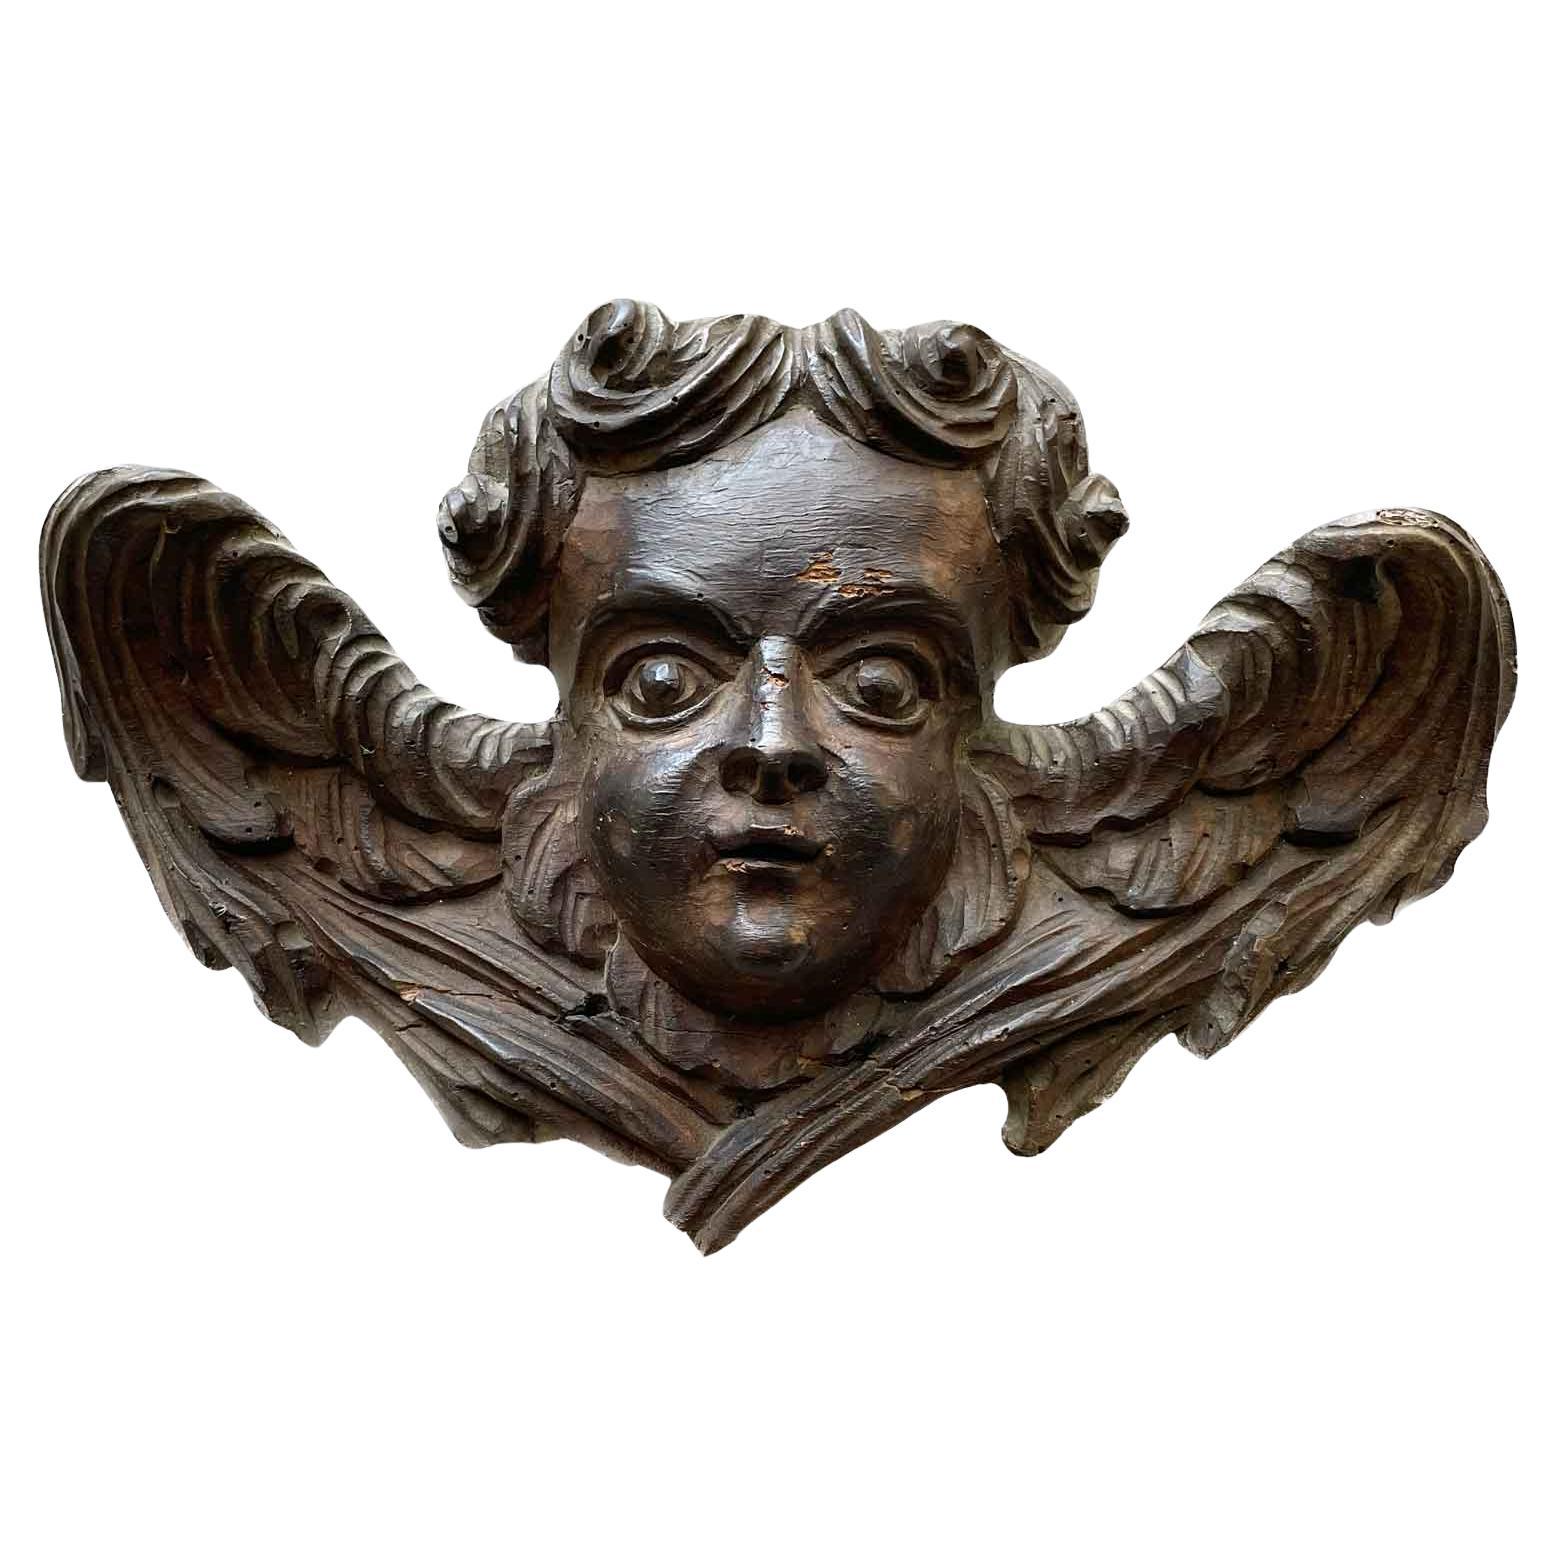 Winged Putto Italian Sculpture 1700 Face of Angel in Carved Wood  For Sale